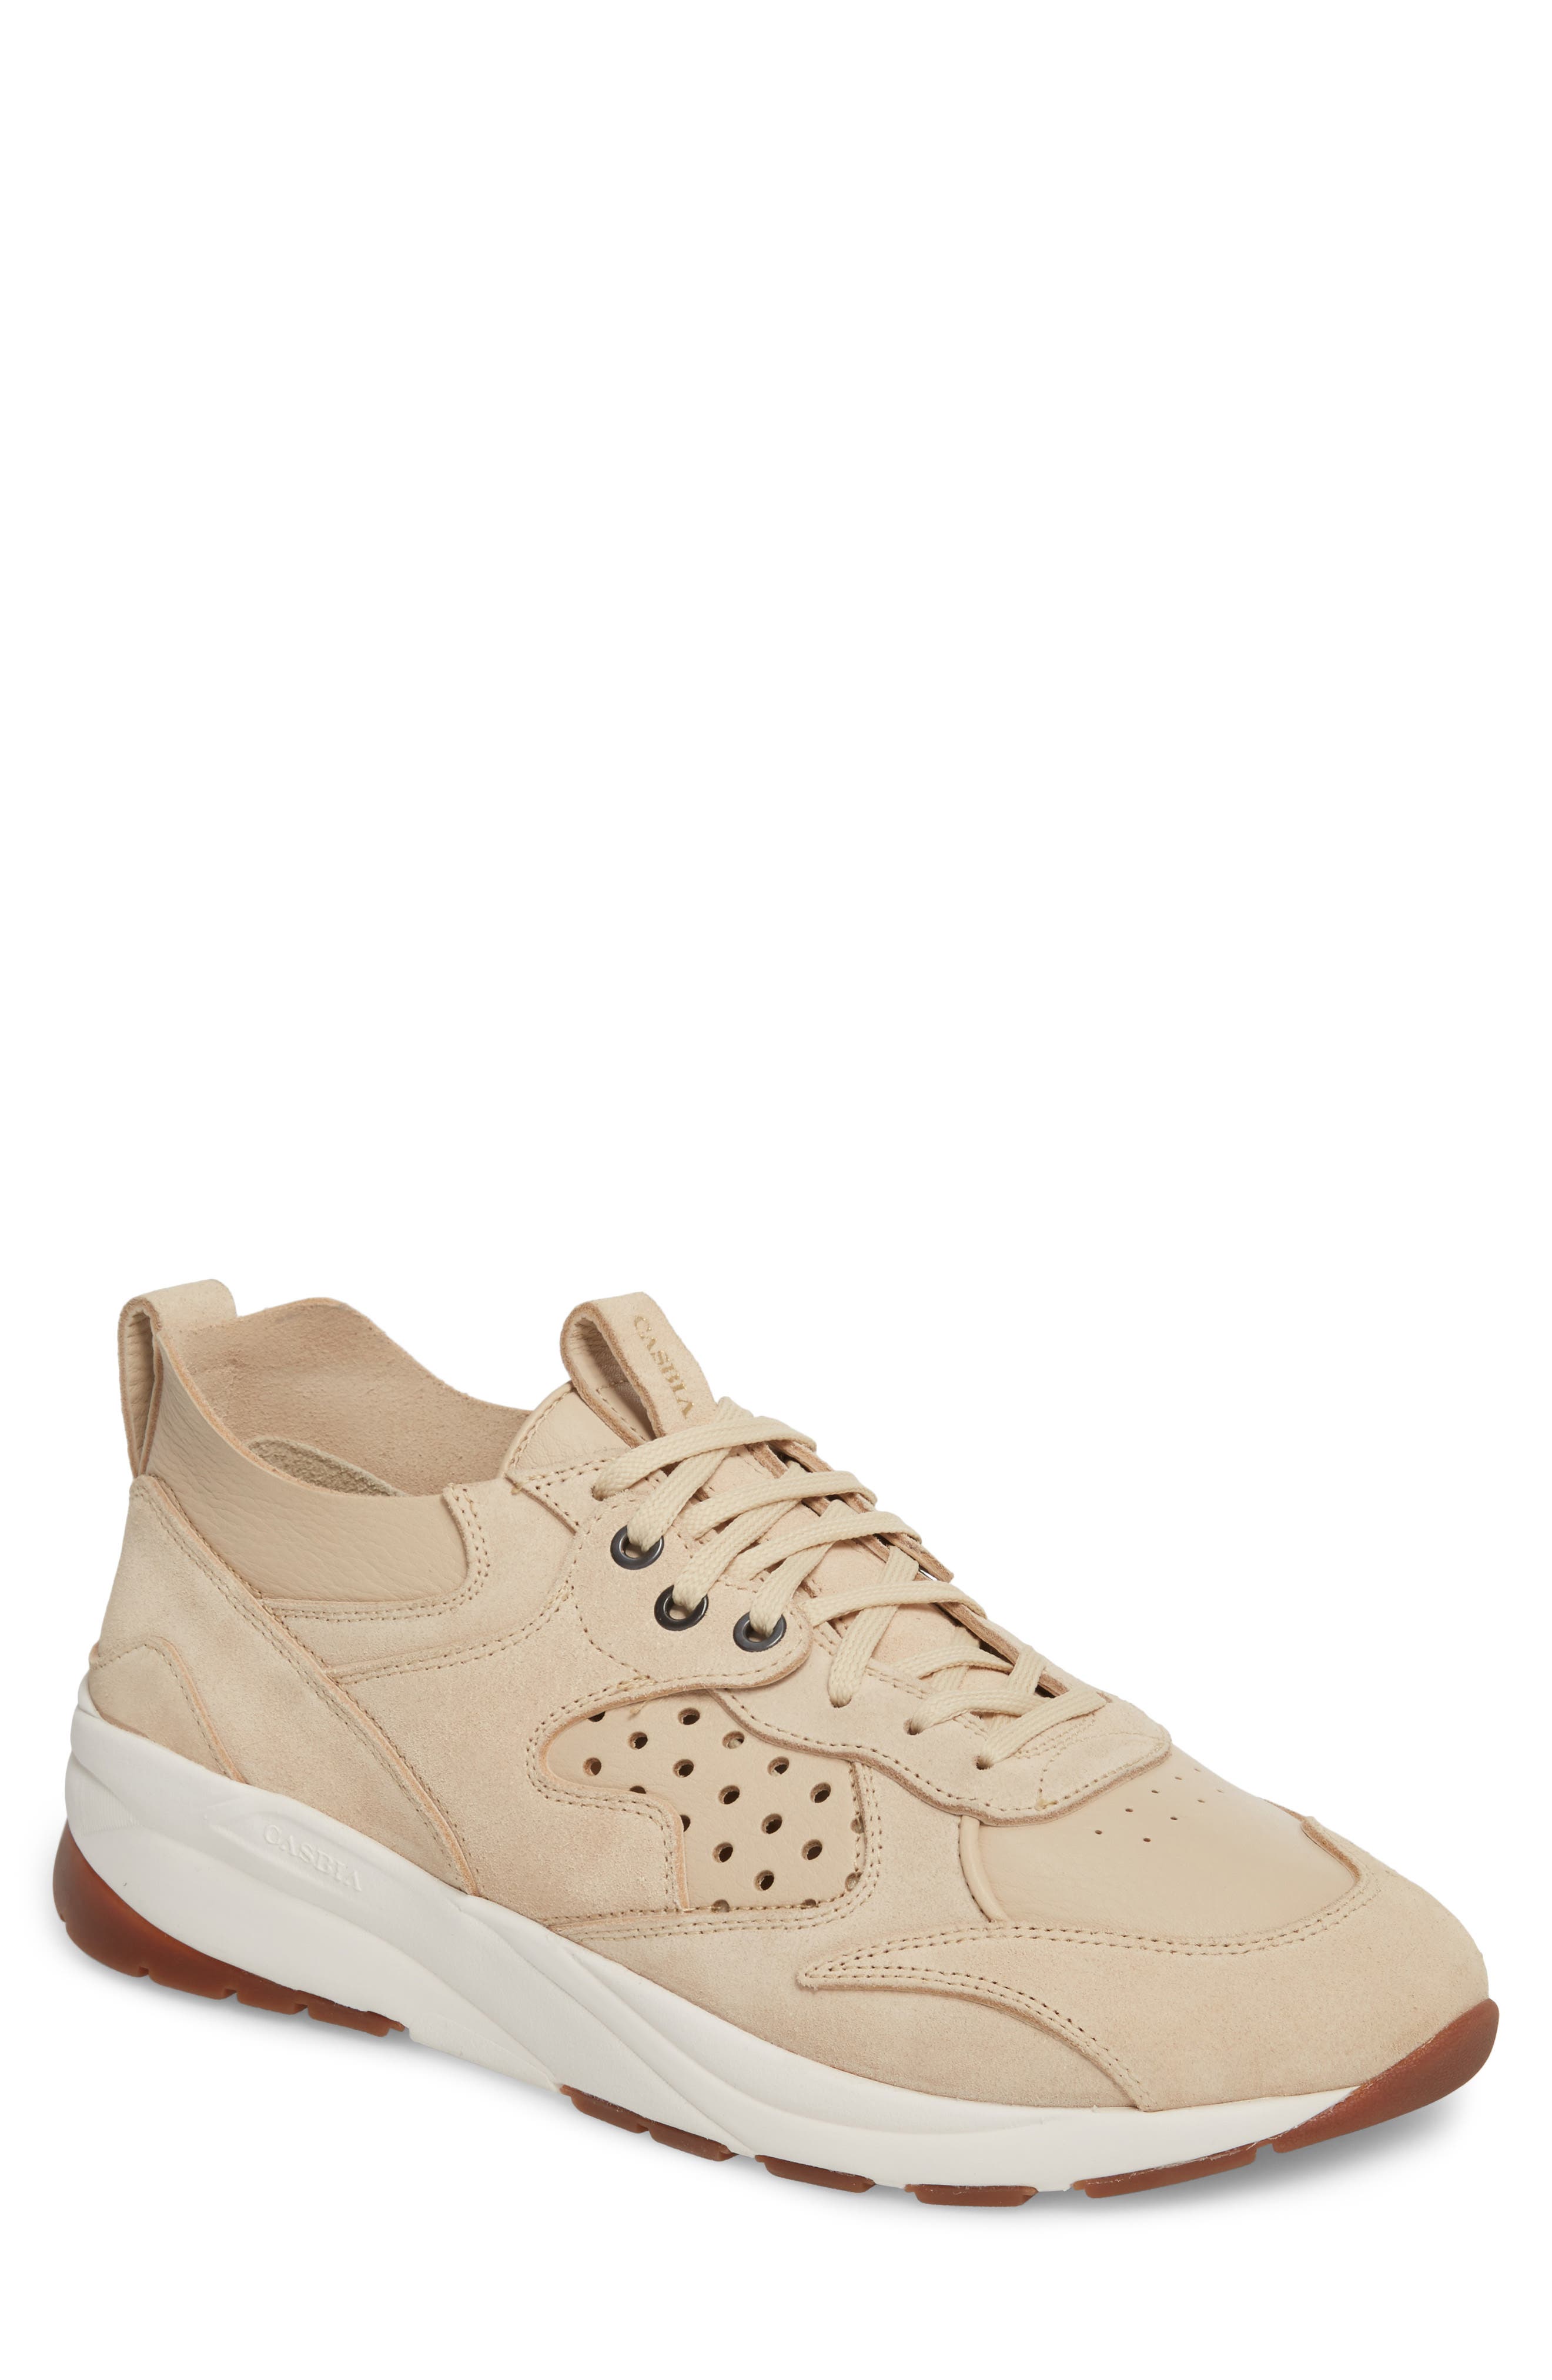 casbia champion sneakers